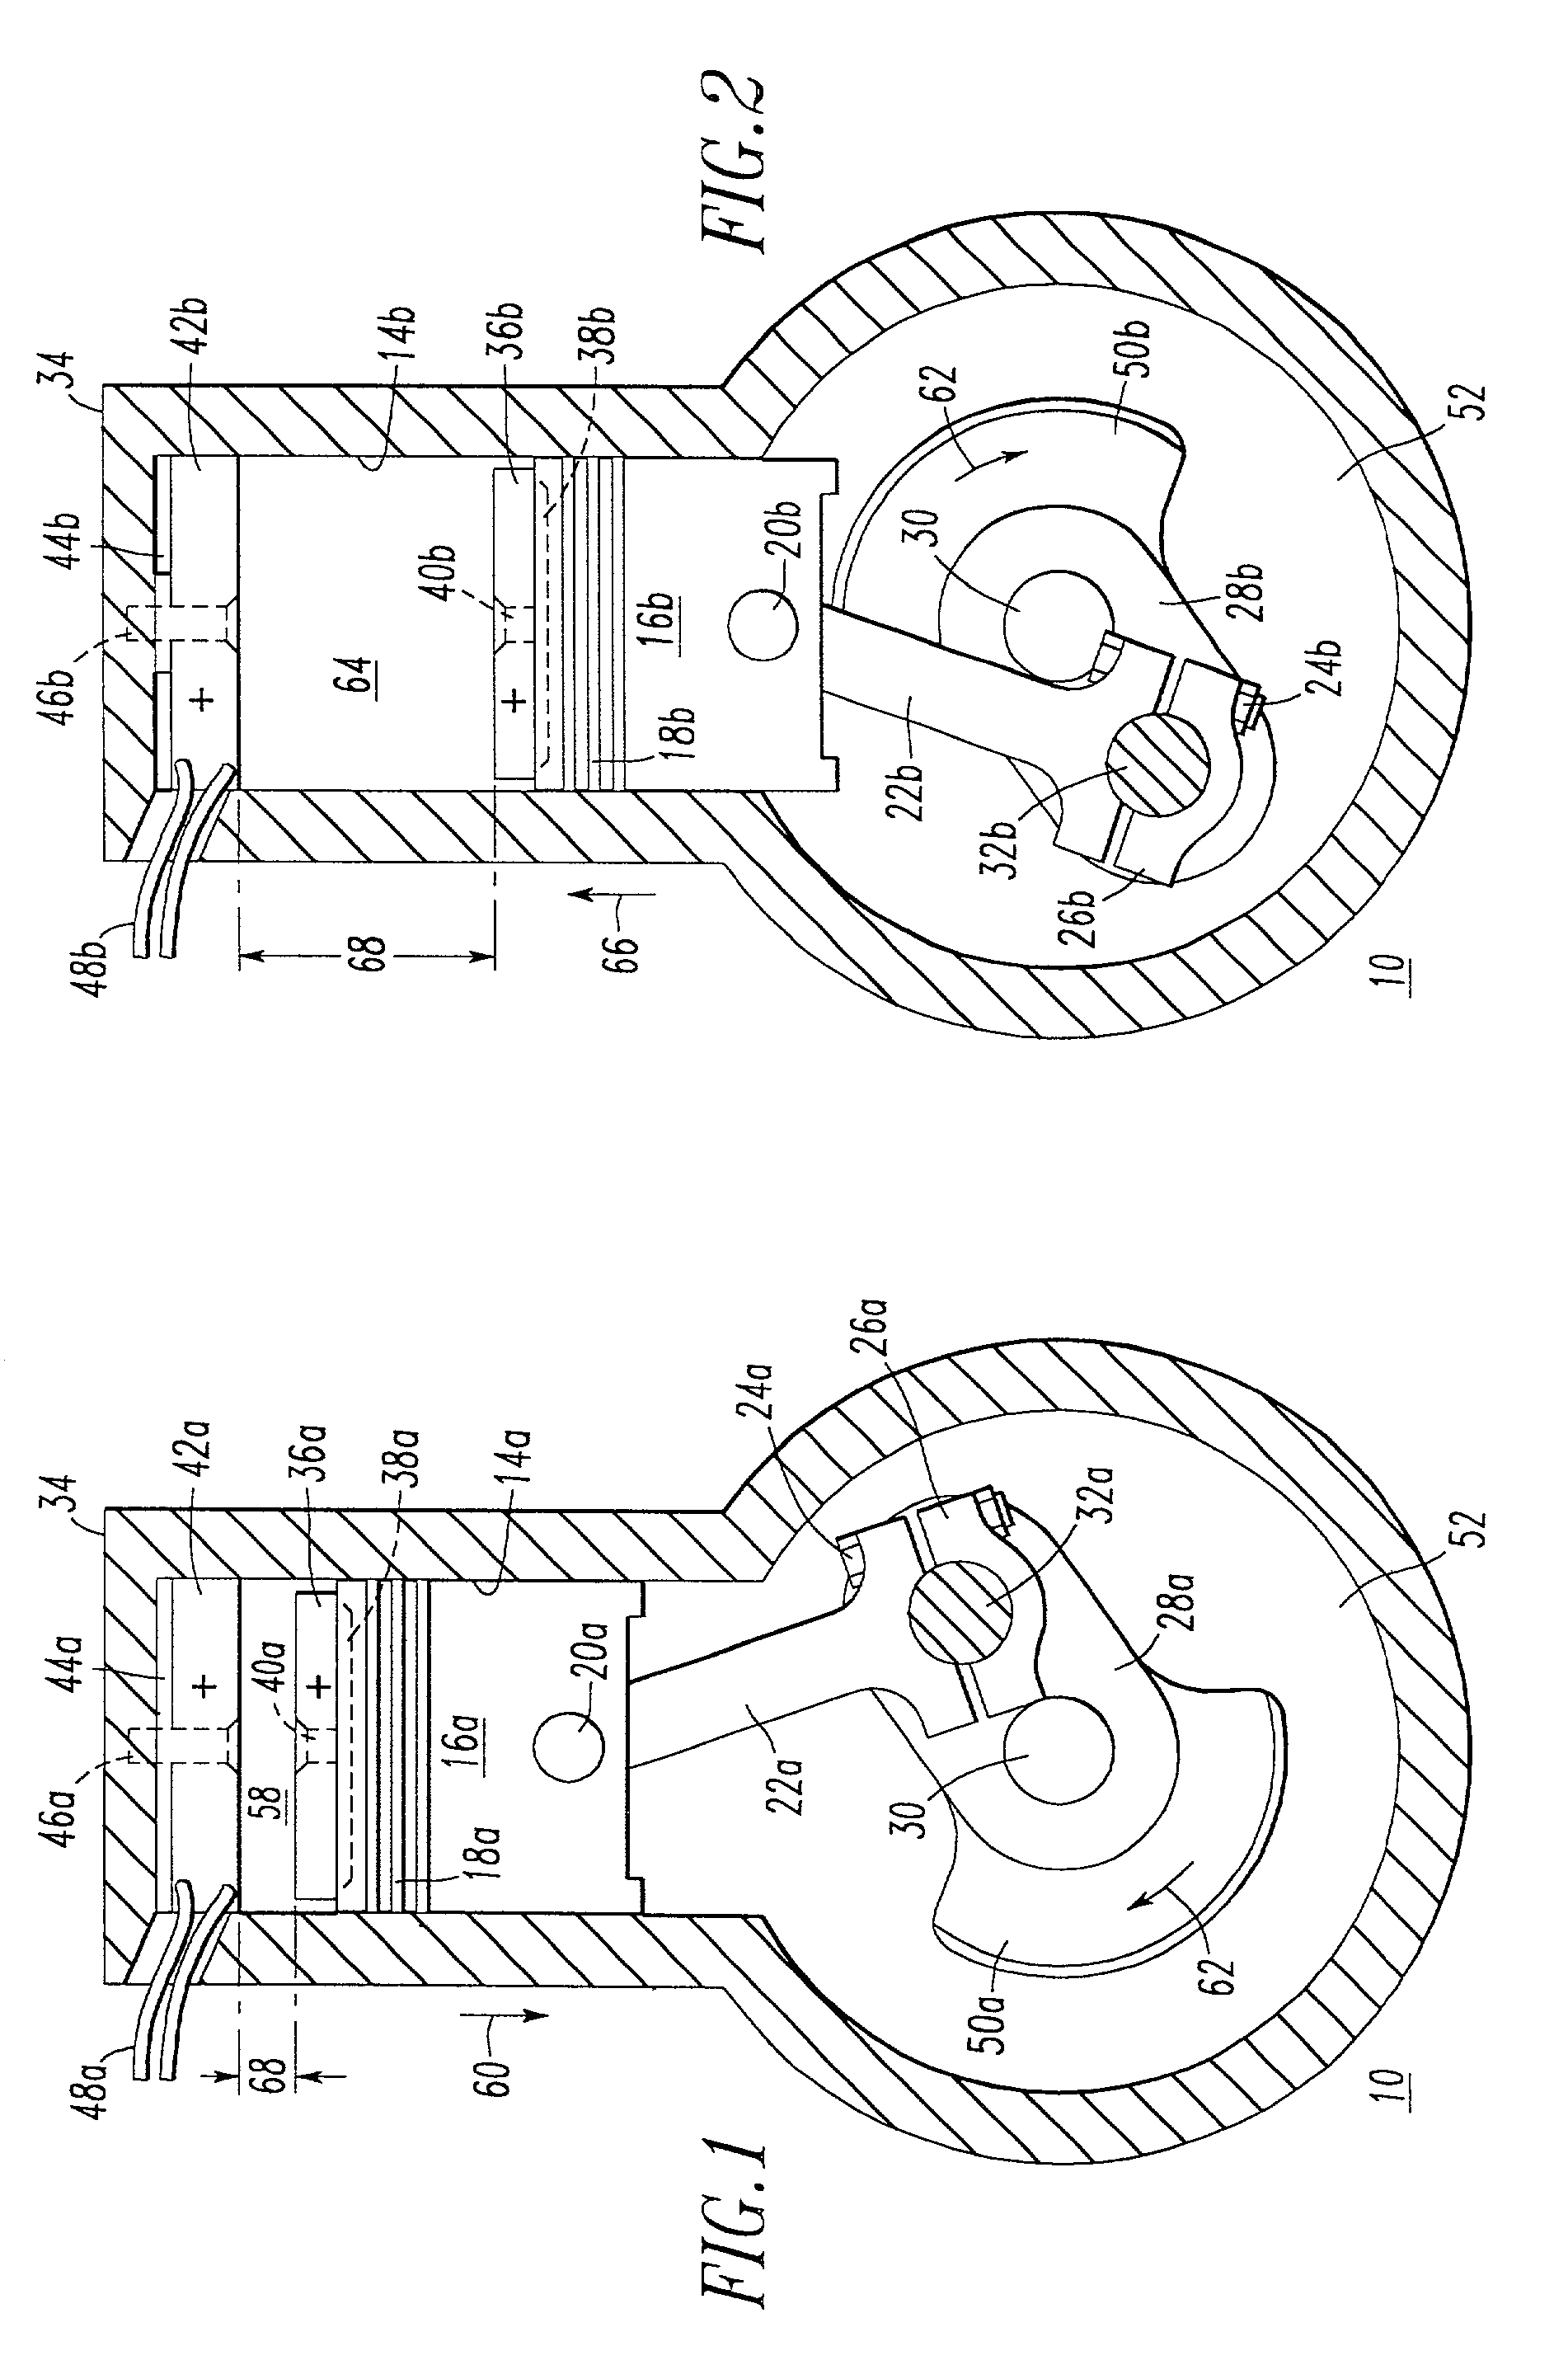 Magnetically powered reciprocating engine